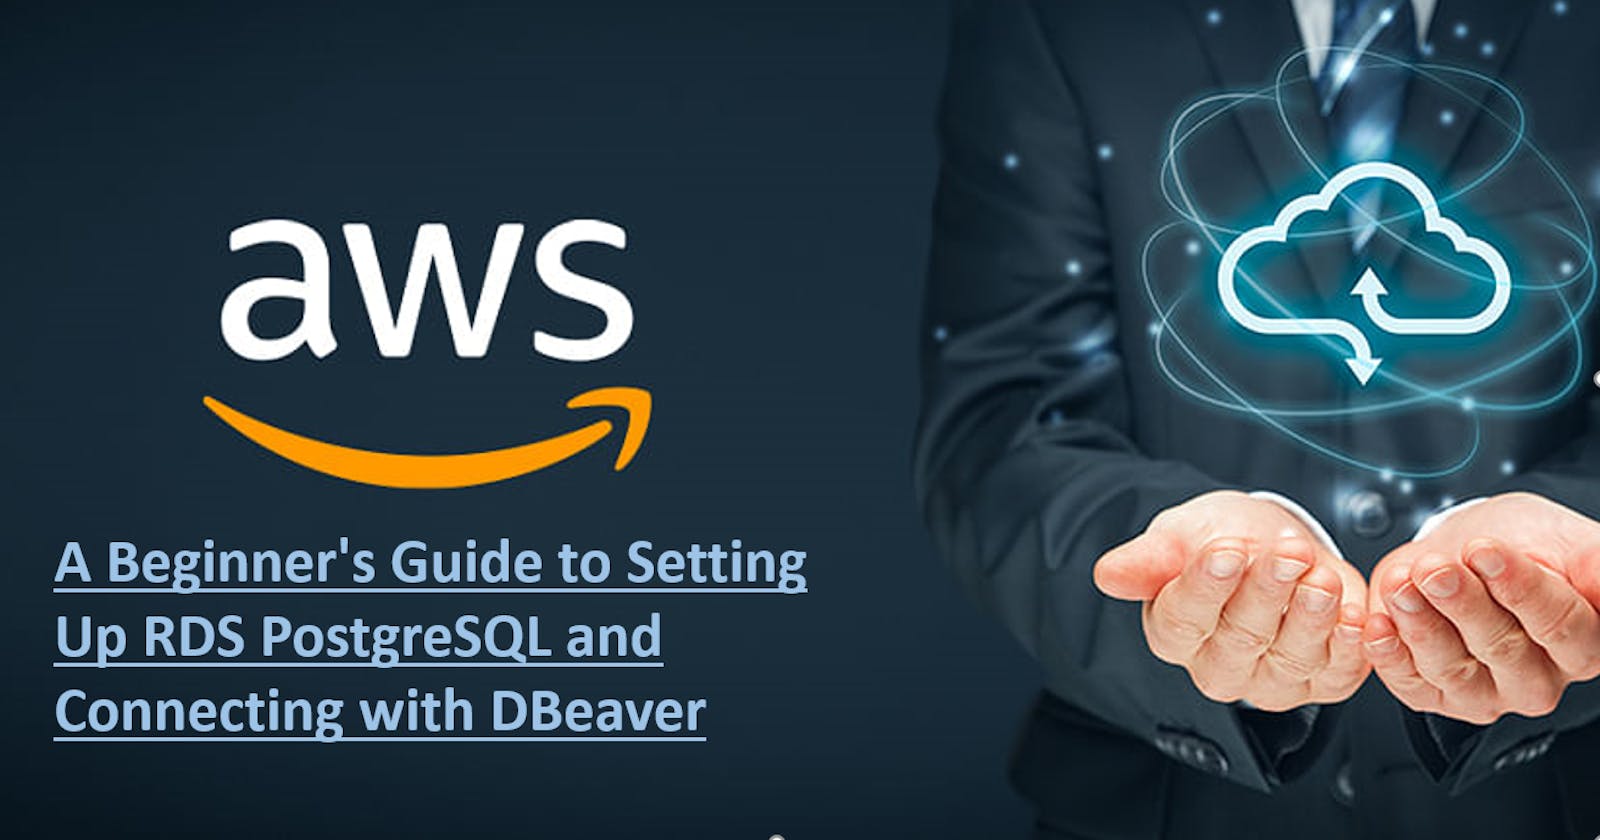 A Beginner's Guide to Setting Up RDS PostgreSQL and Connecting with DBeaver(Privetly through SSH tunnel)🌐